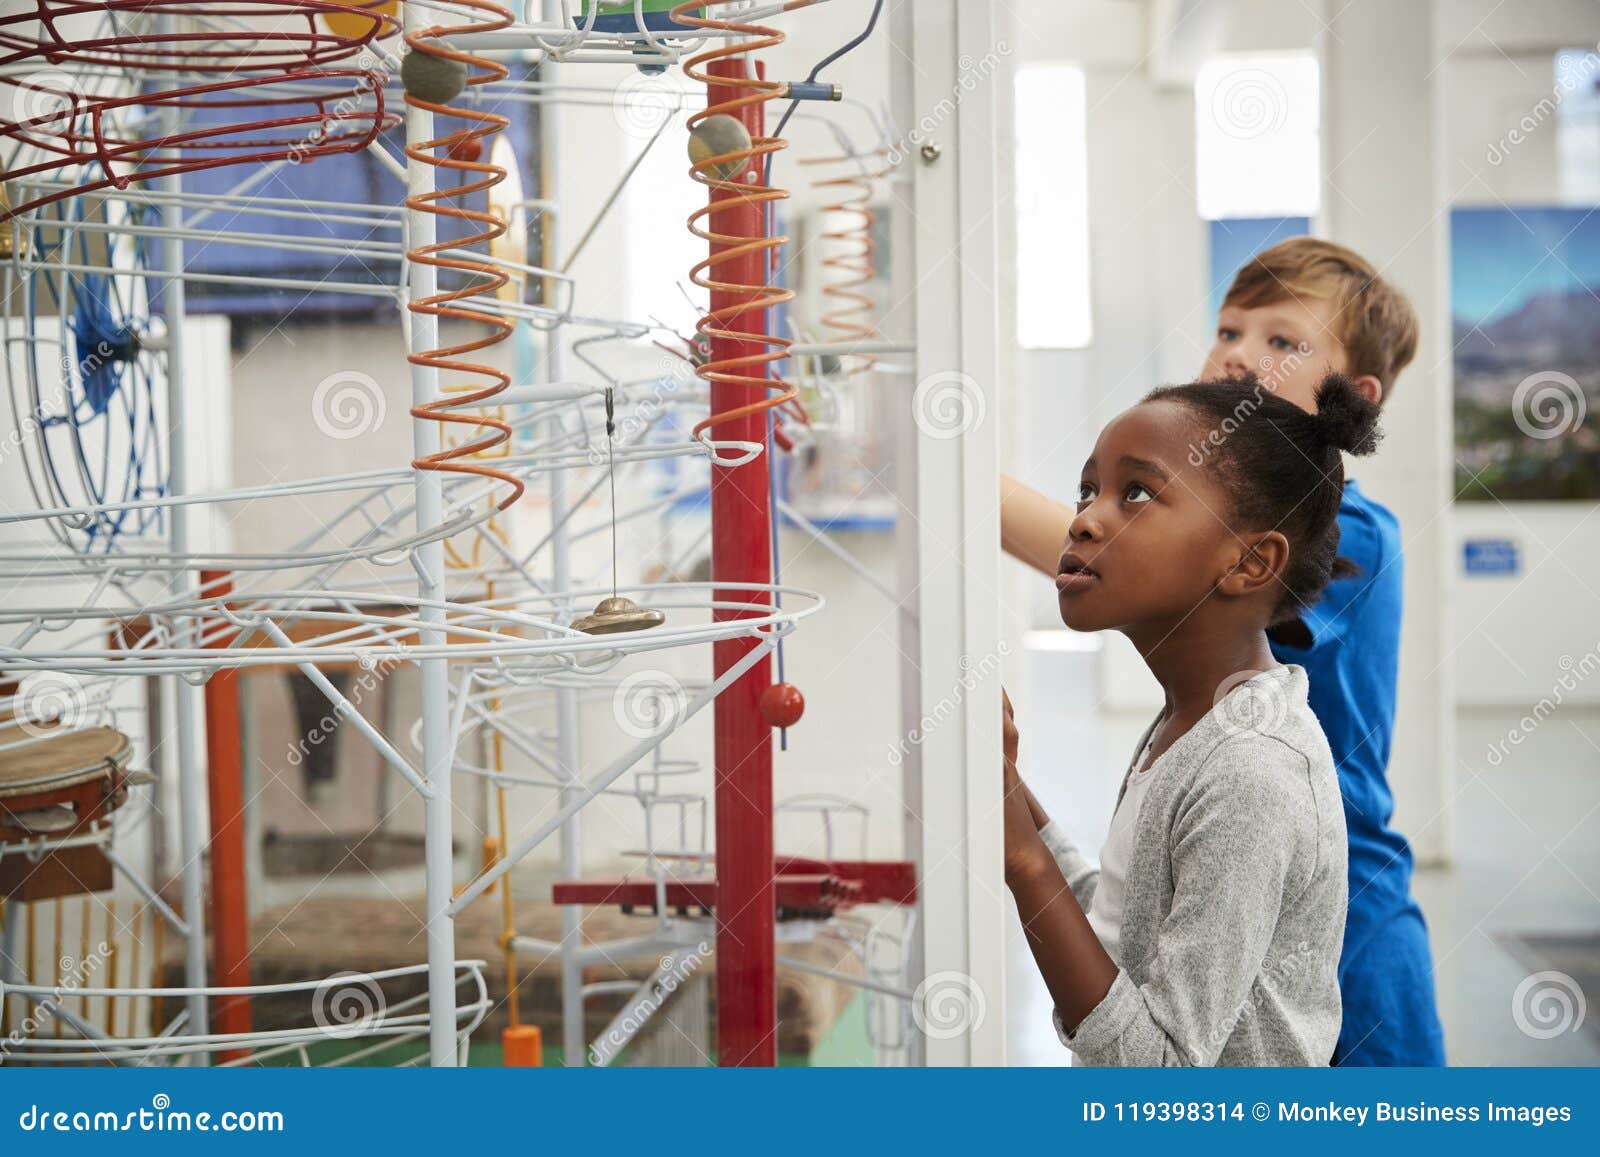 two kids looking at a science exhibit, waist up